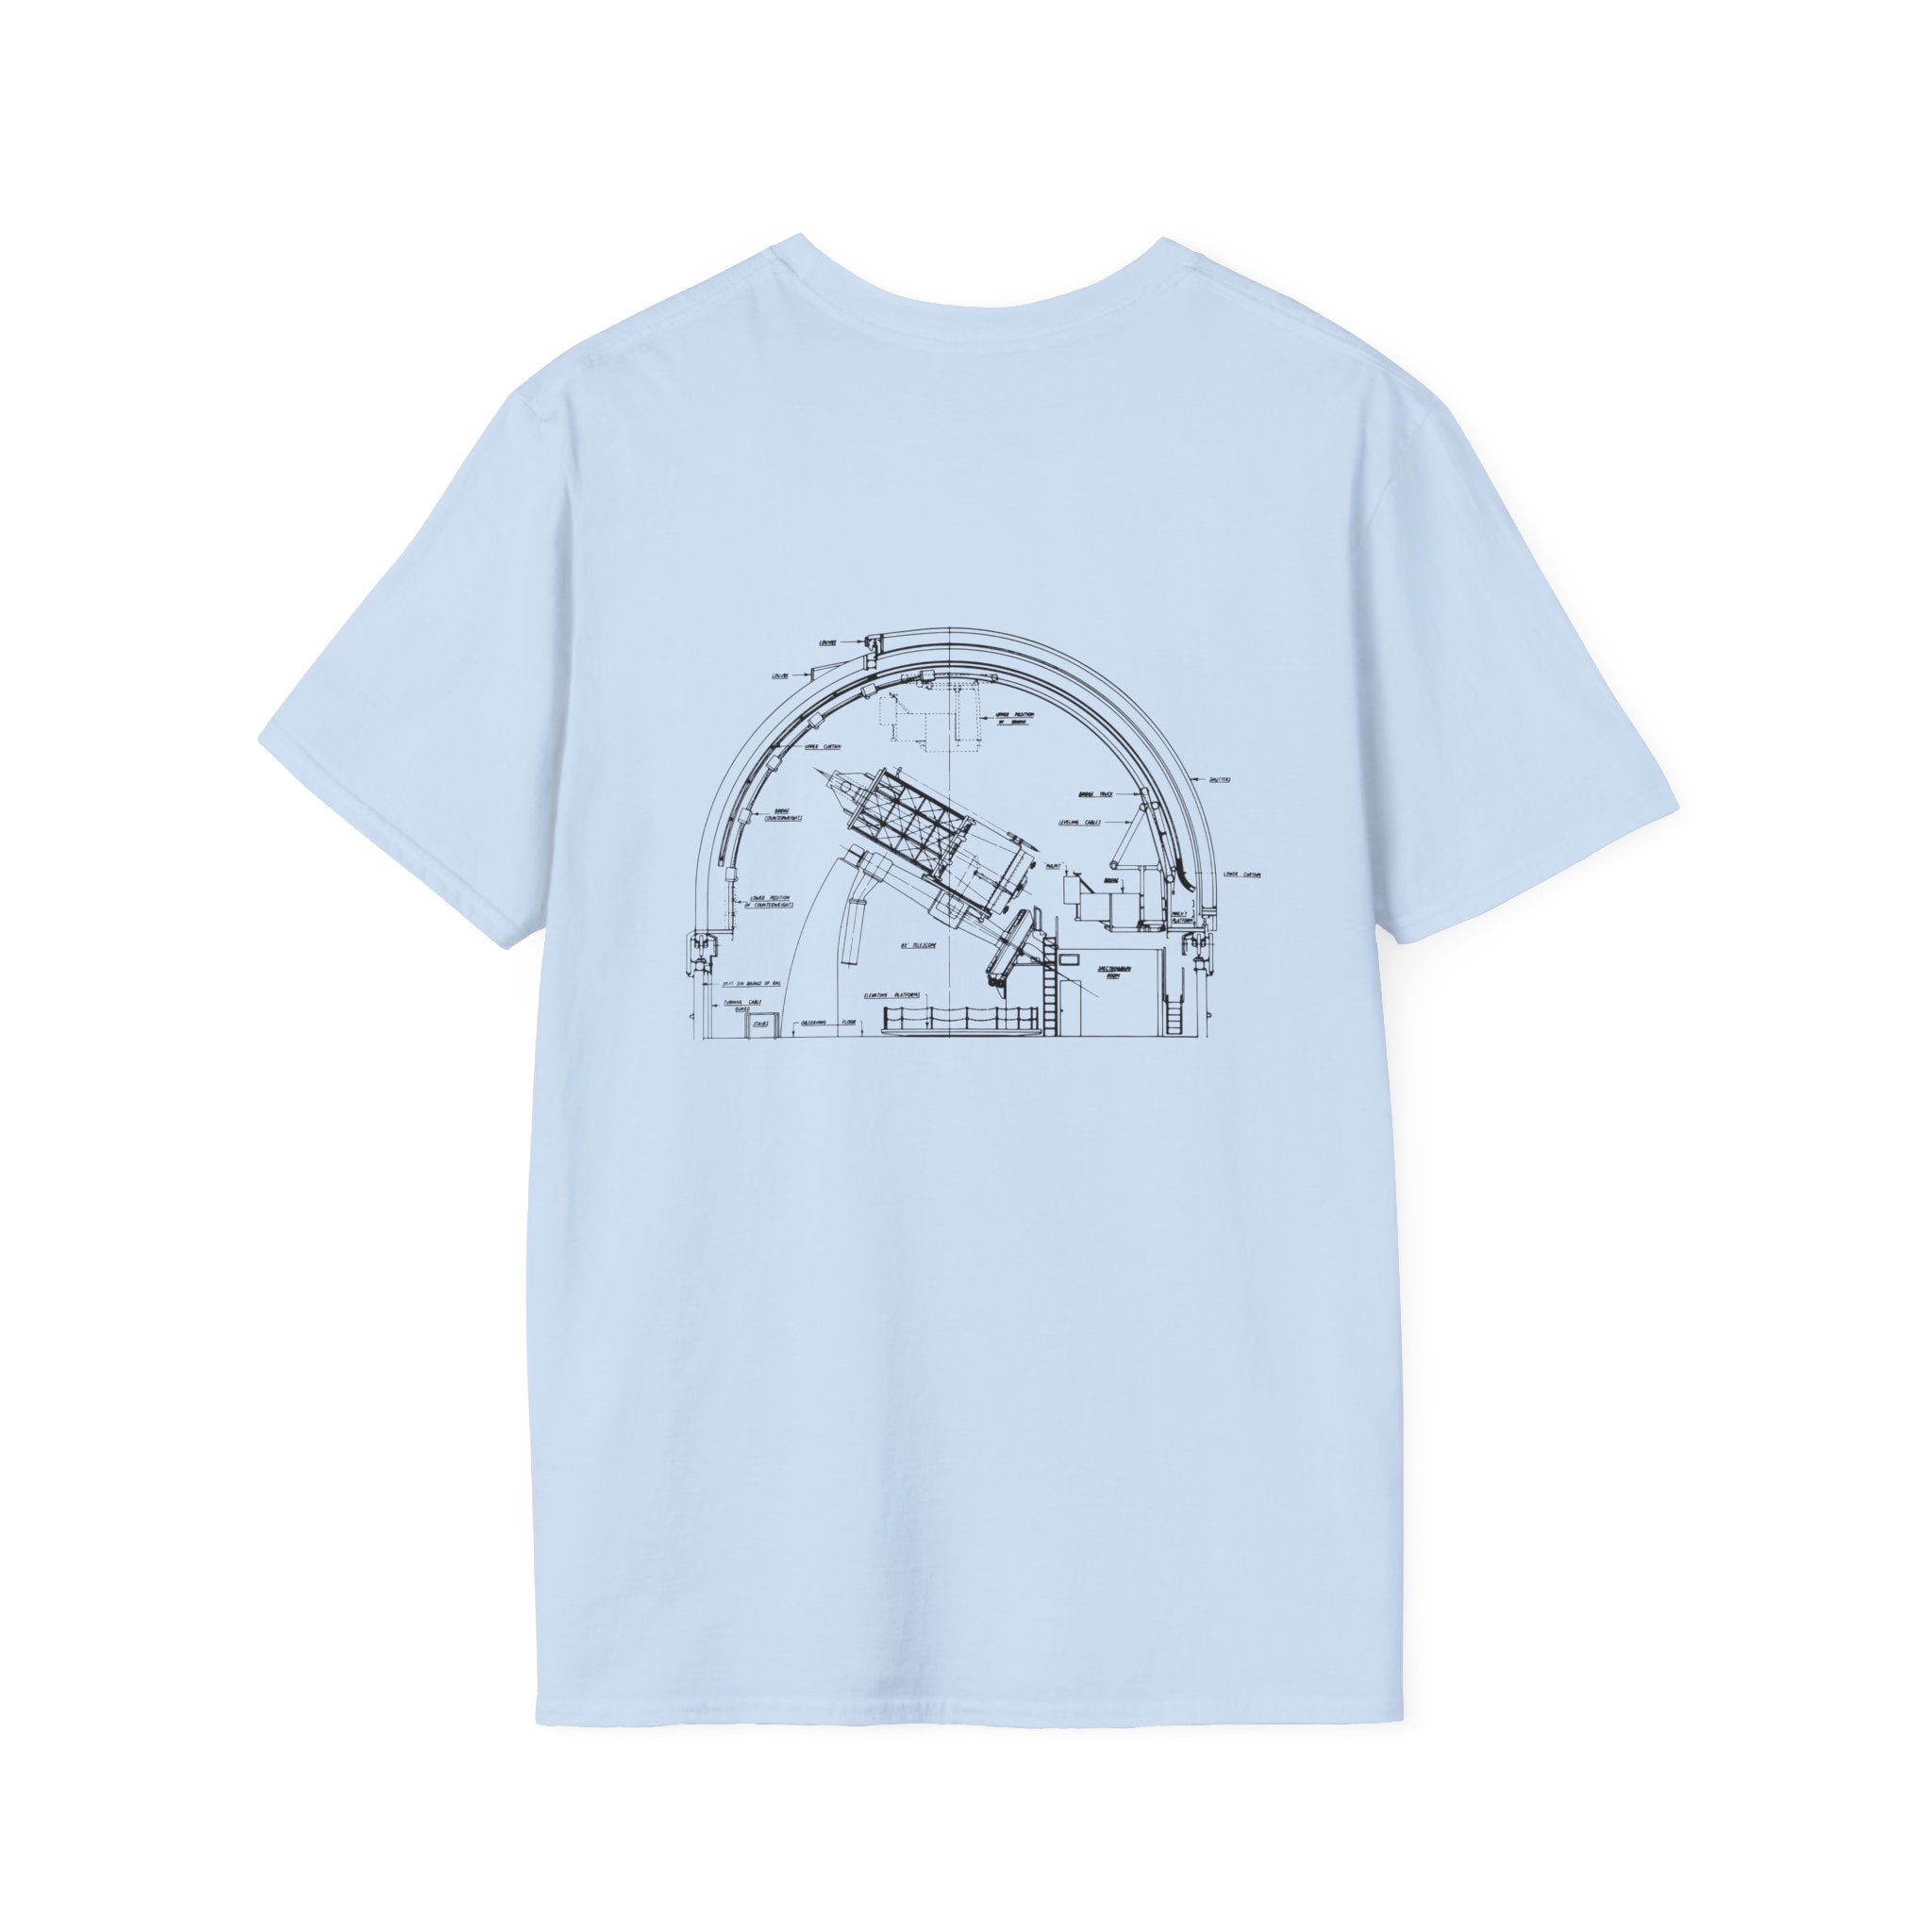 Space is Waiting T-Shirt